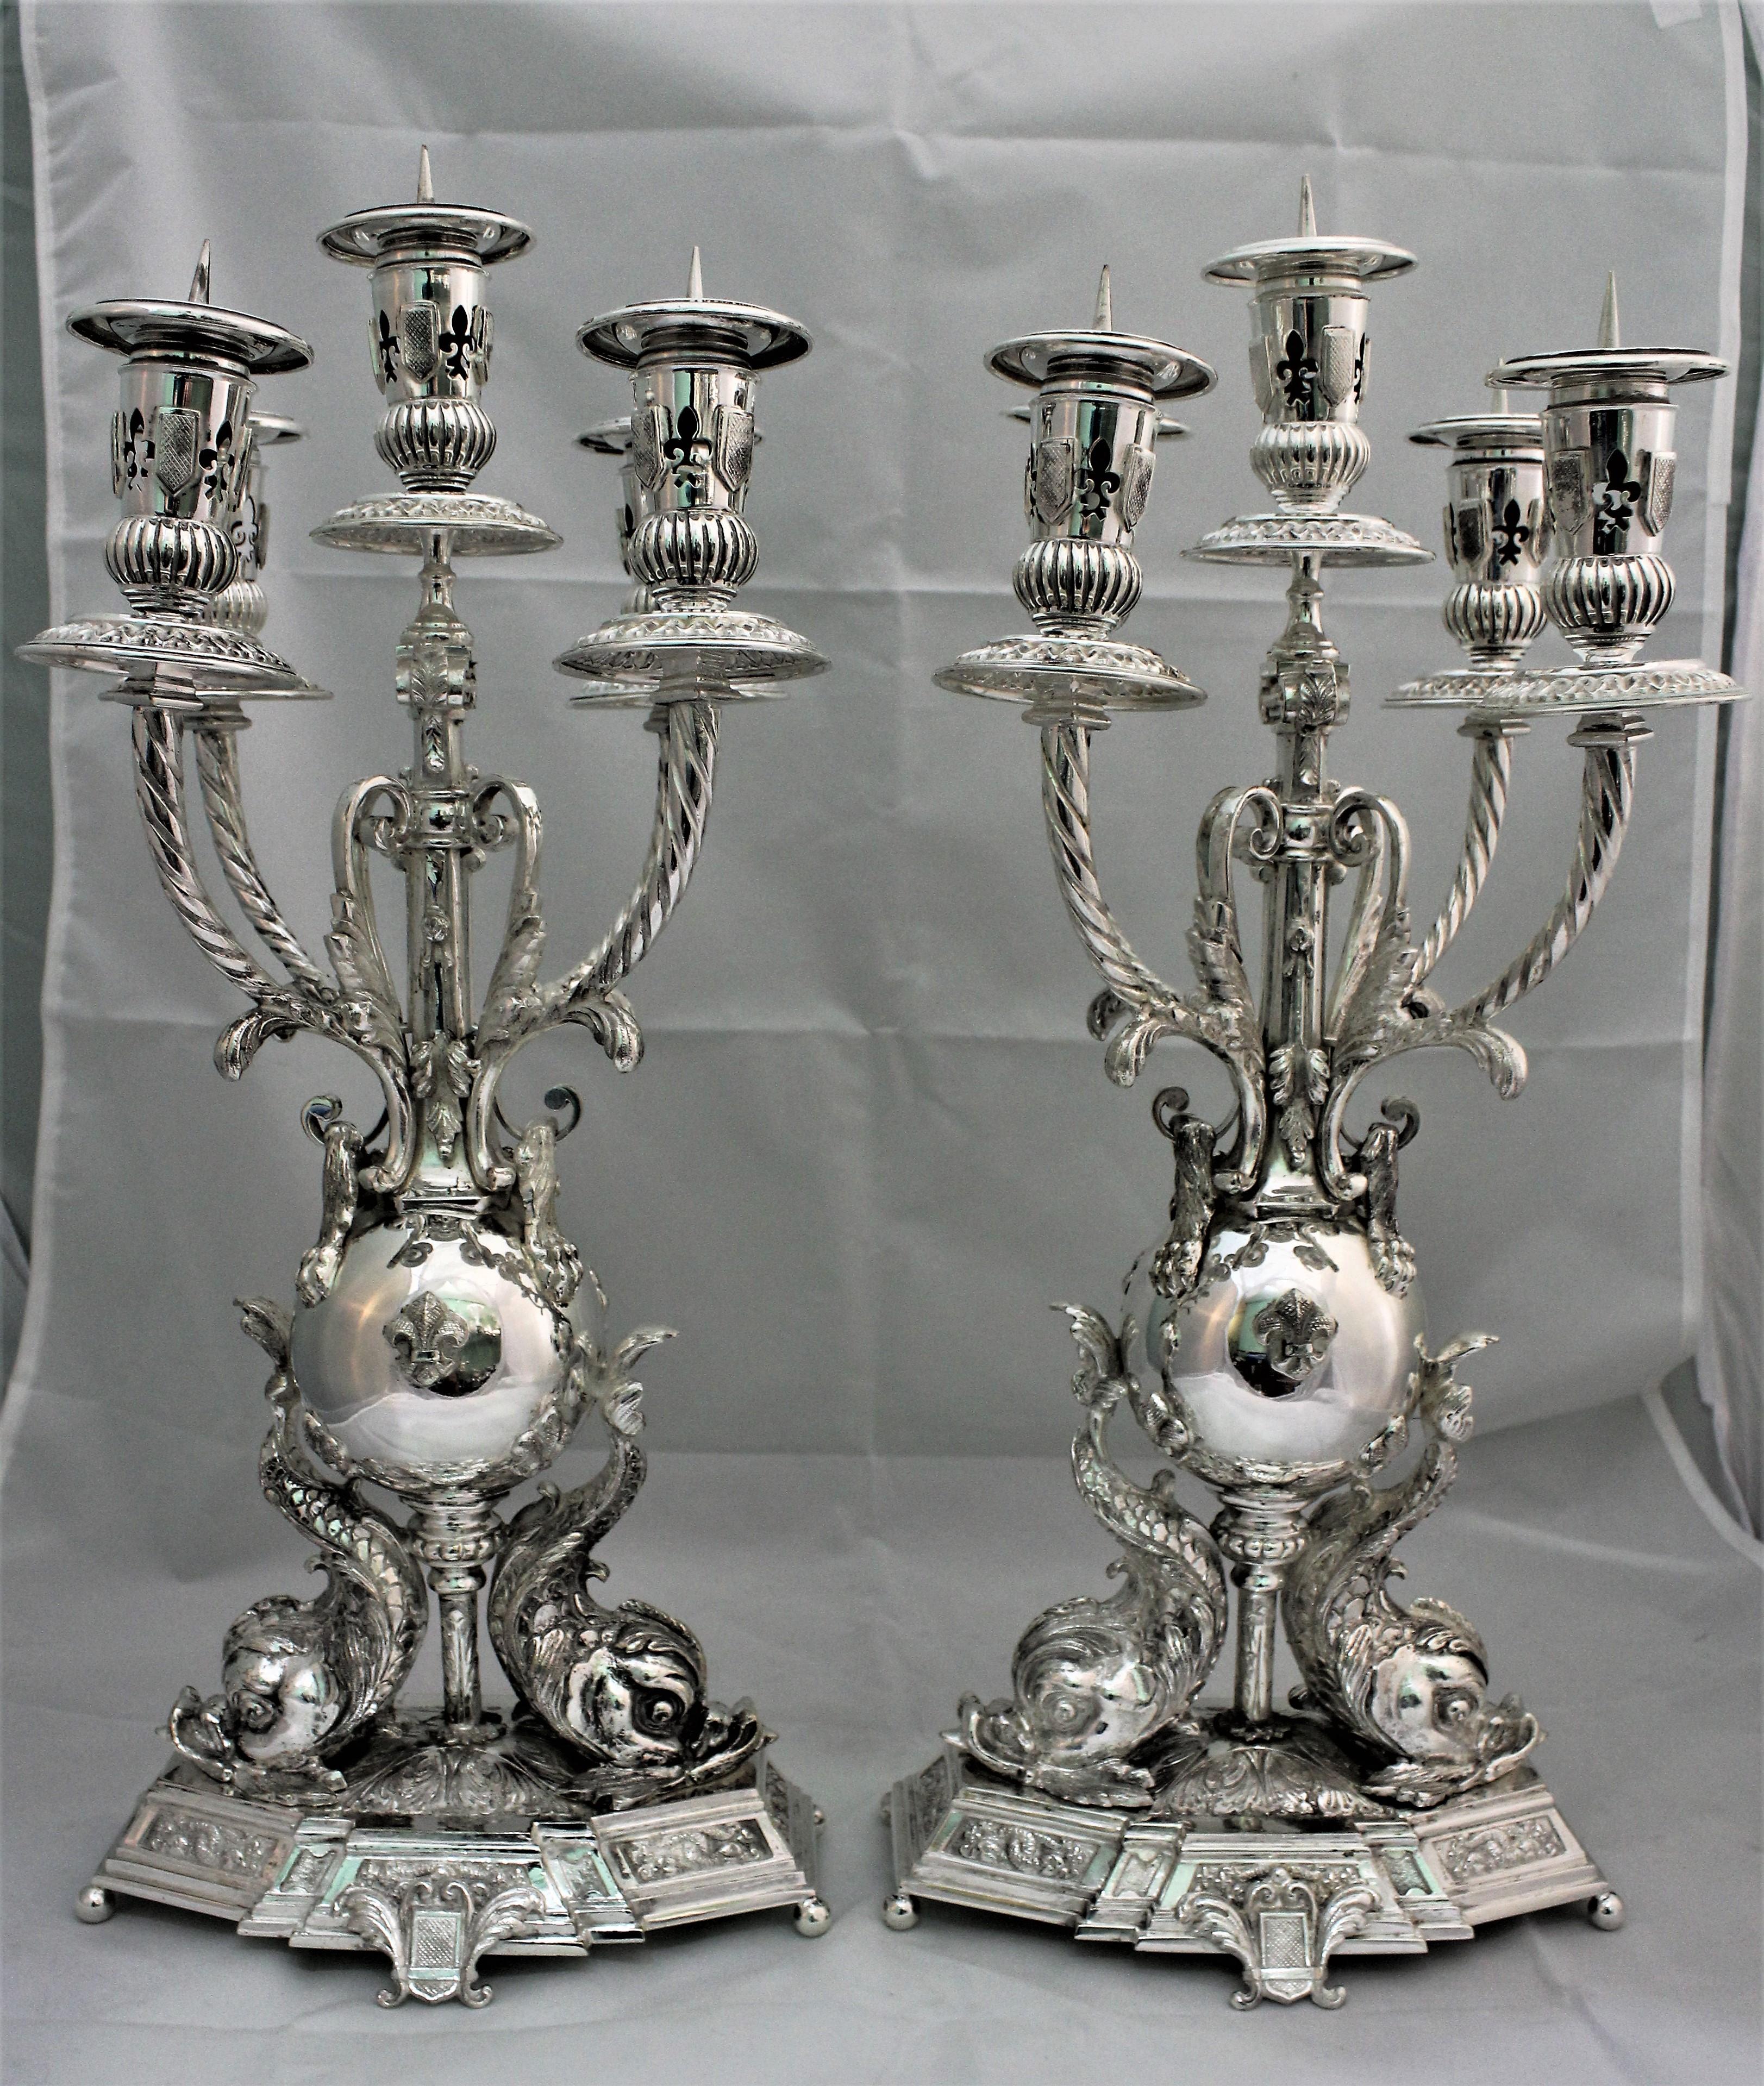 Pair of silver candelabras realized around 1950s in Florence by the famous Florentine silversmith Brandimarte.

Impressive dimension H 52 cm x 22 x 20 cm

Base octagonal upon which there are 2 tritons holding the upper part of the